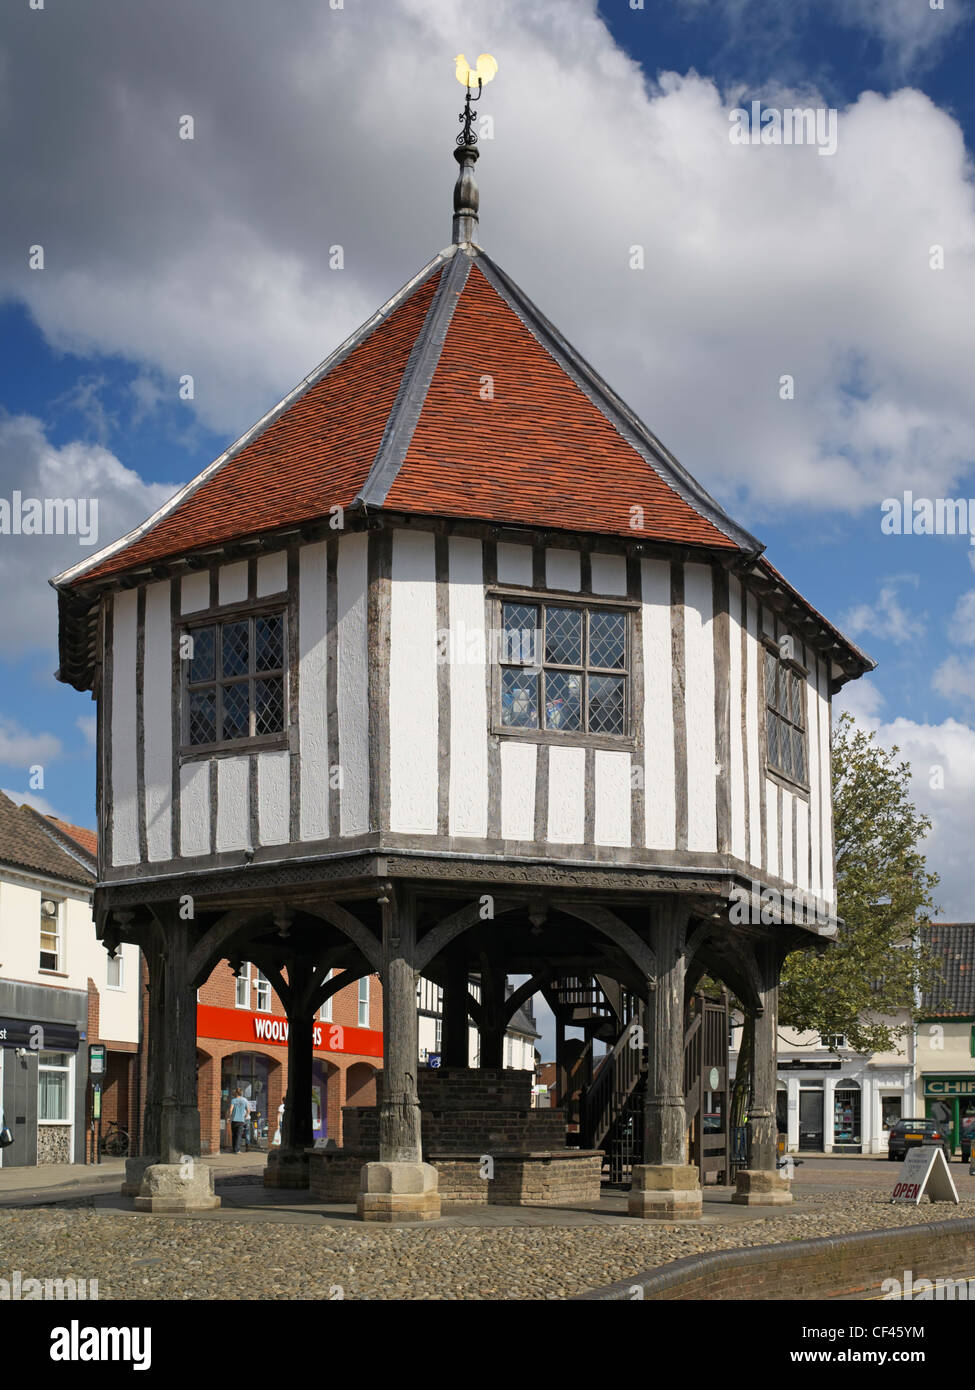 Wymondham Market Cross. A small East Anglian marktet town, Robert Kett is its most famous imhabitant, who in 1549 led a rebellio Stock Photo